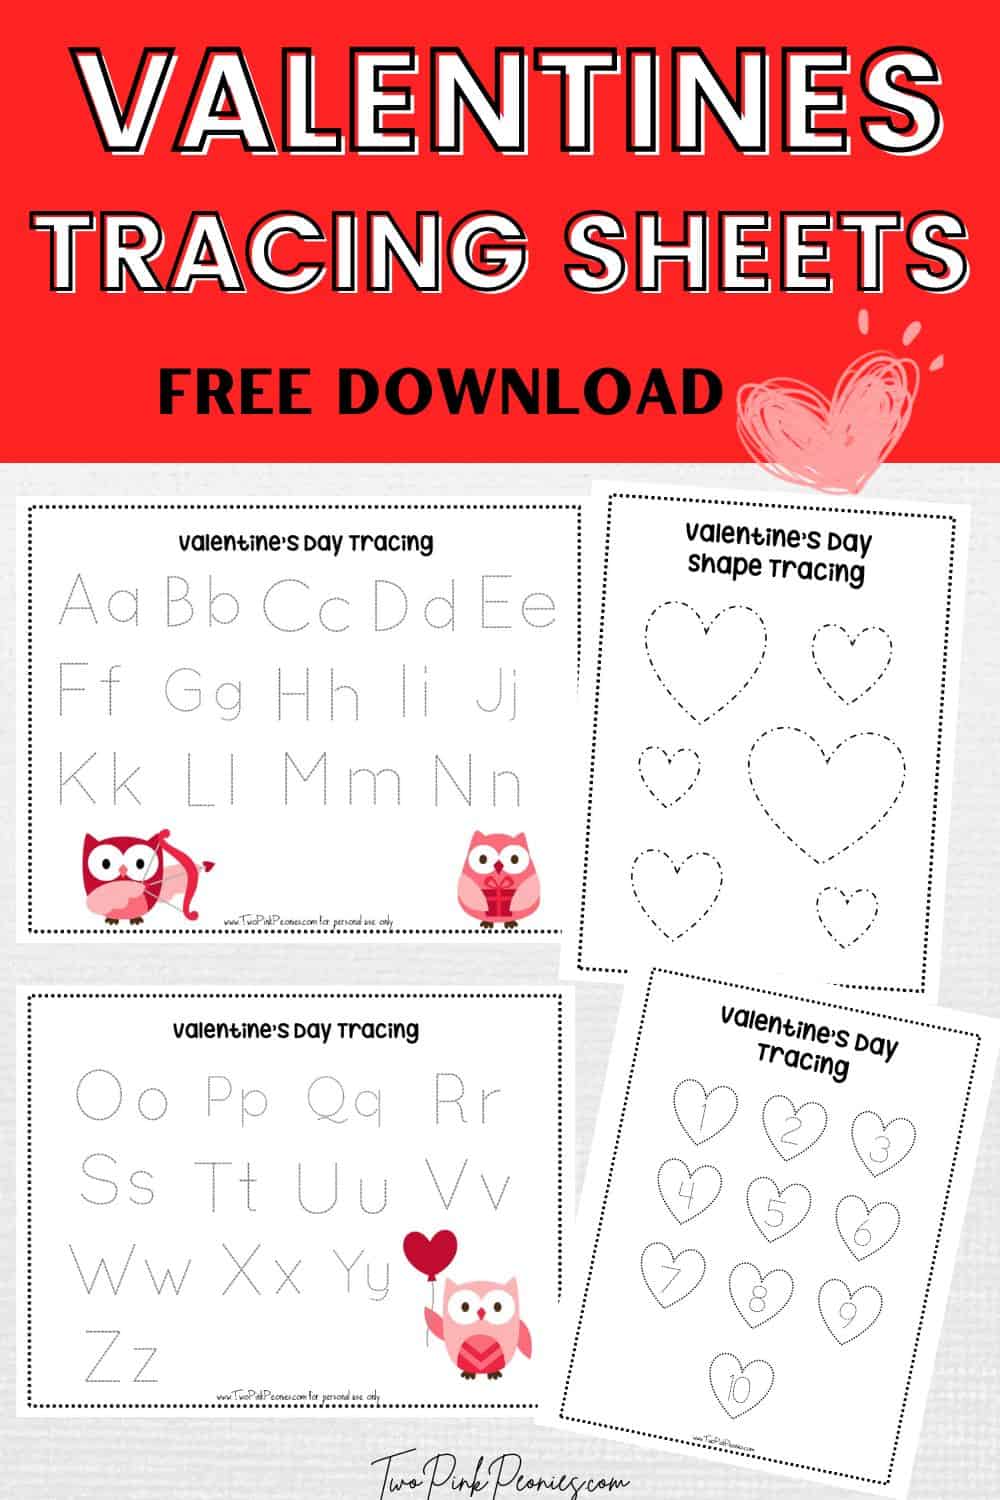 Text that says Valentines Tracing Sheets free download. Below are mock ups of some of the tracing worksheets (alphabet, numbers, hearts). 